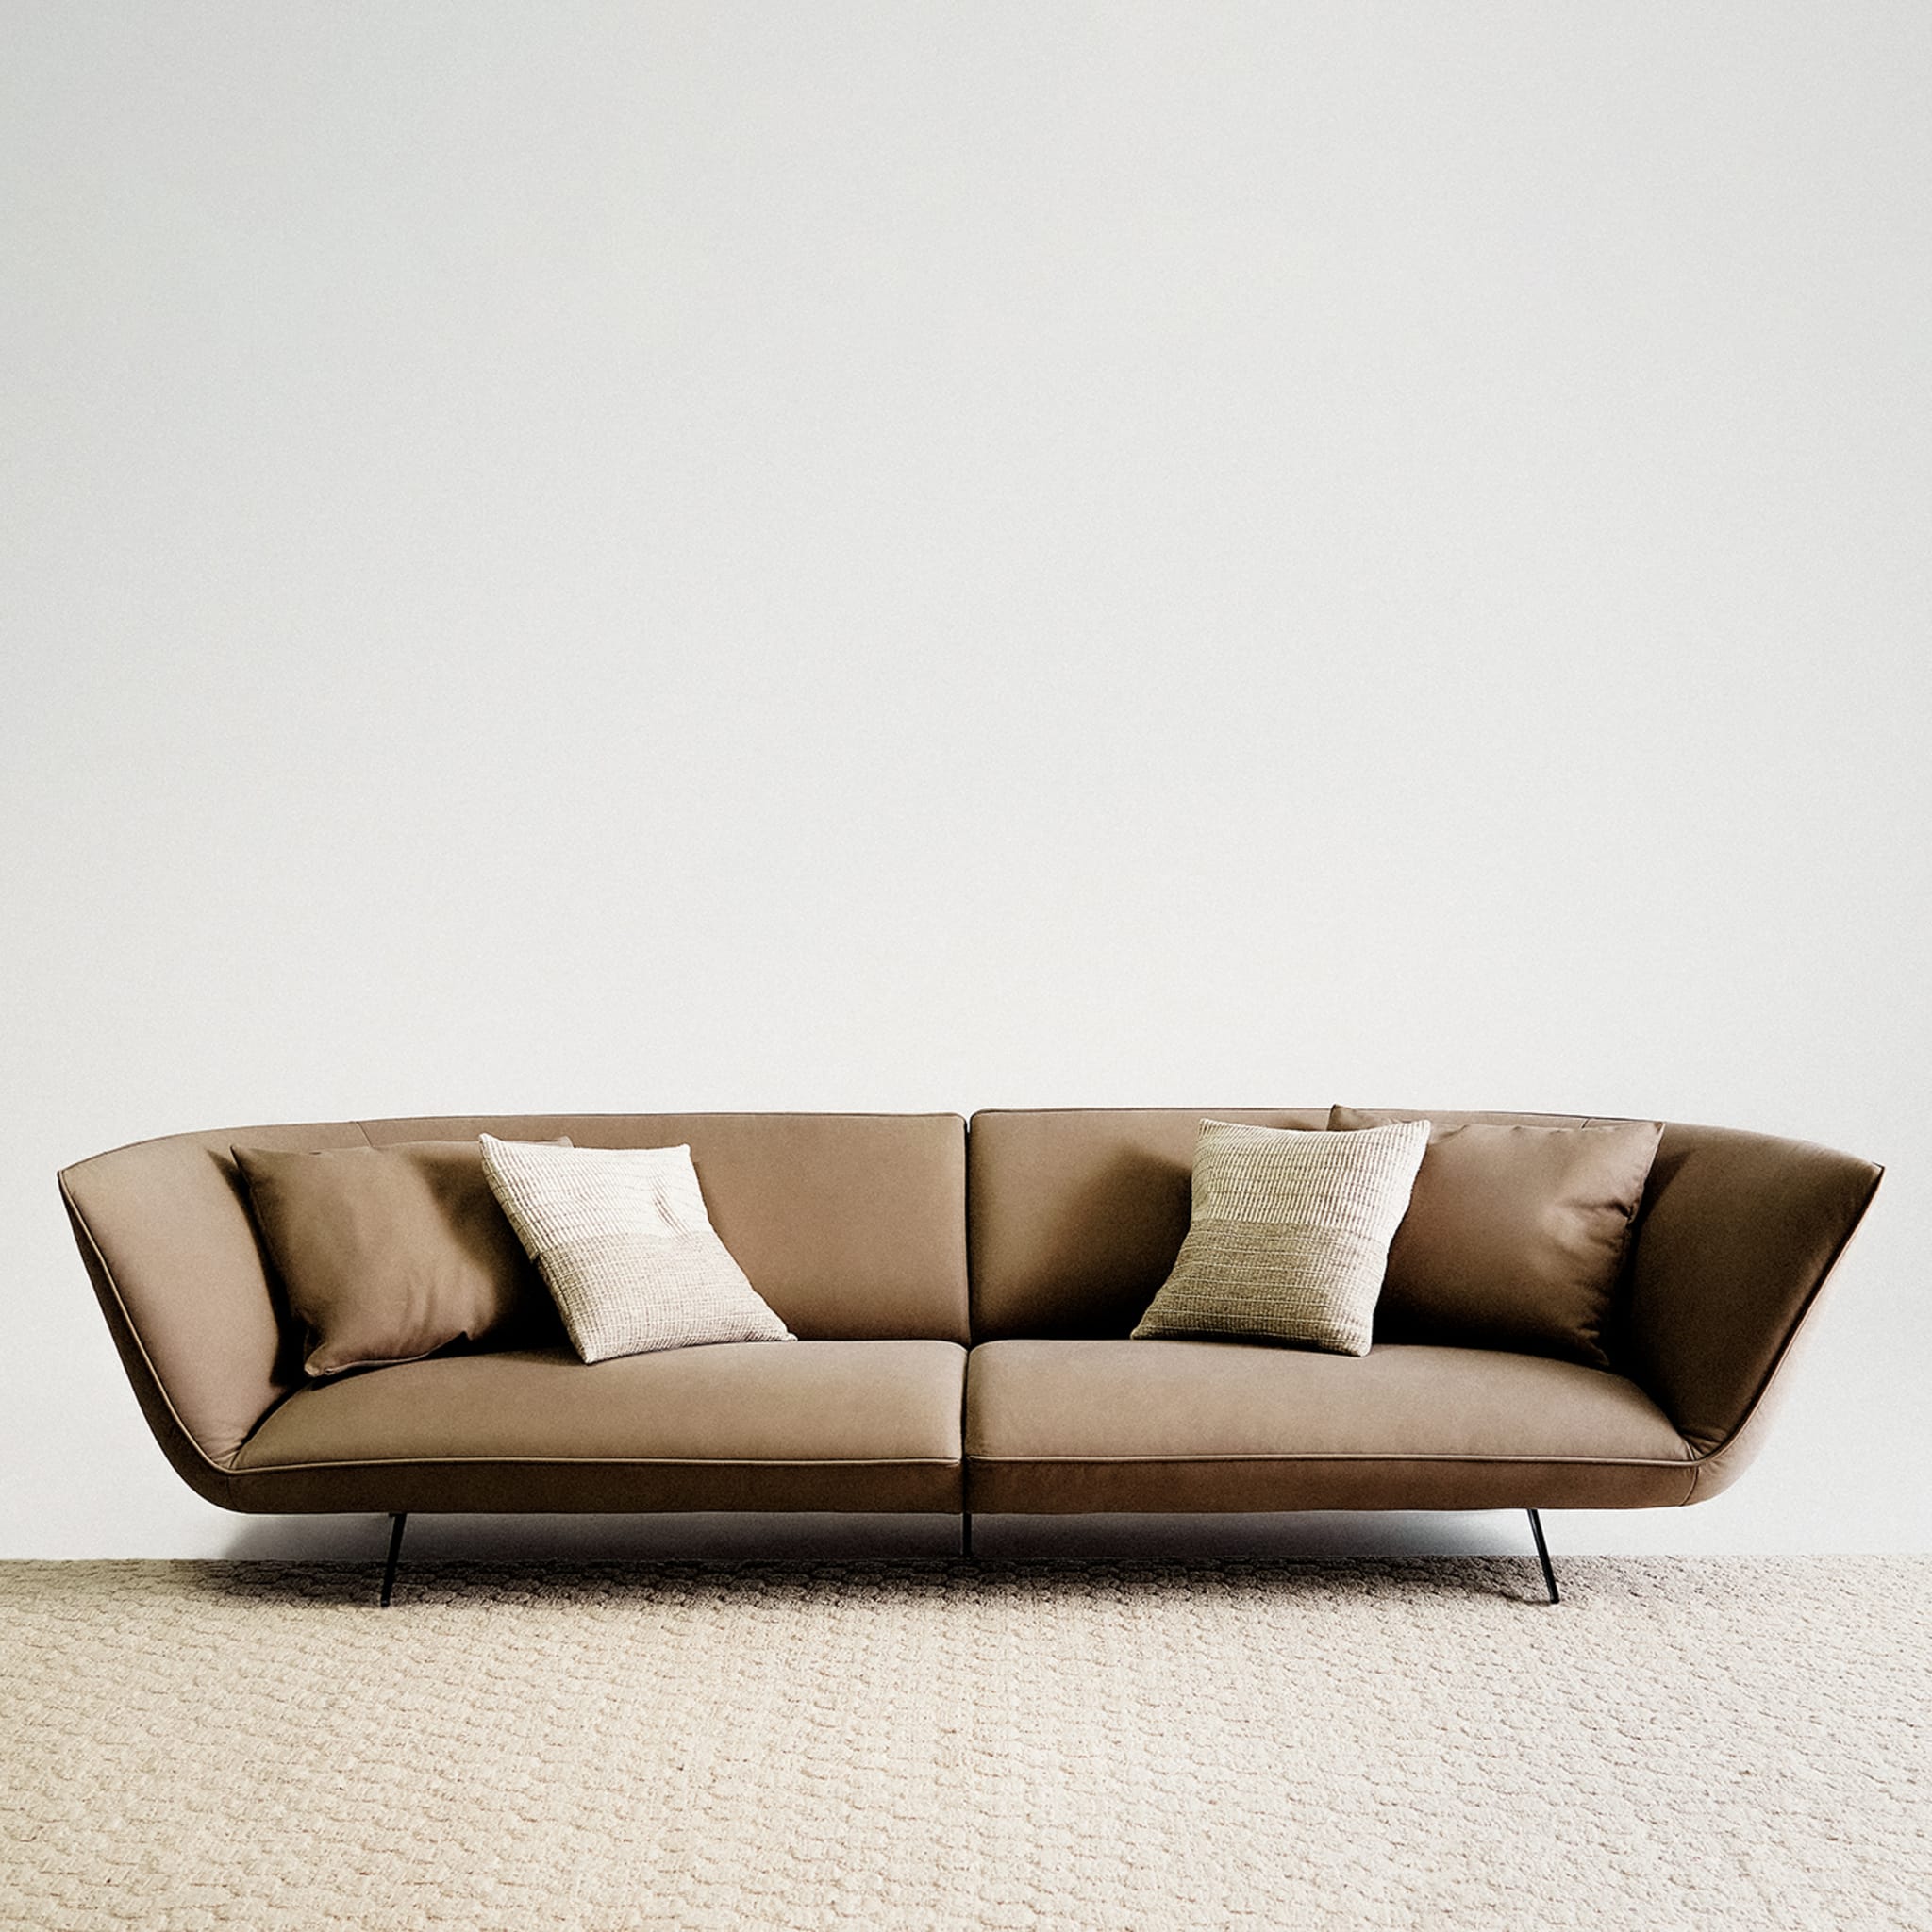 Athene 3-Seater Leather Sofa by Ludovica + Roberto Palomba - Alternative view 1